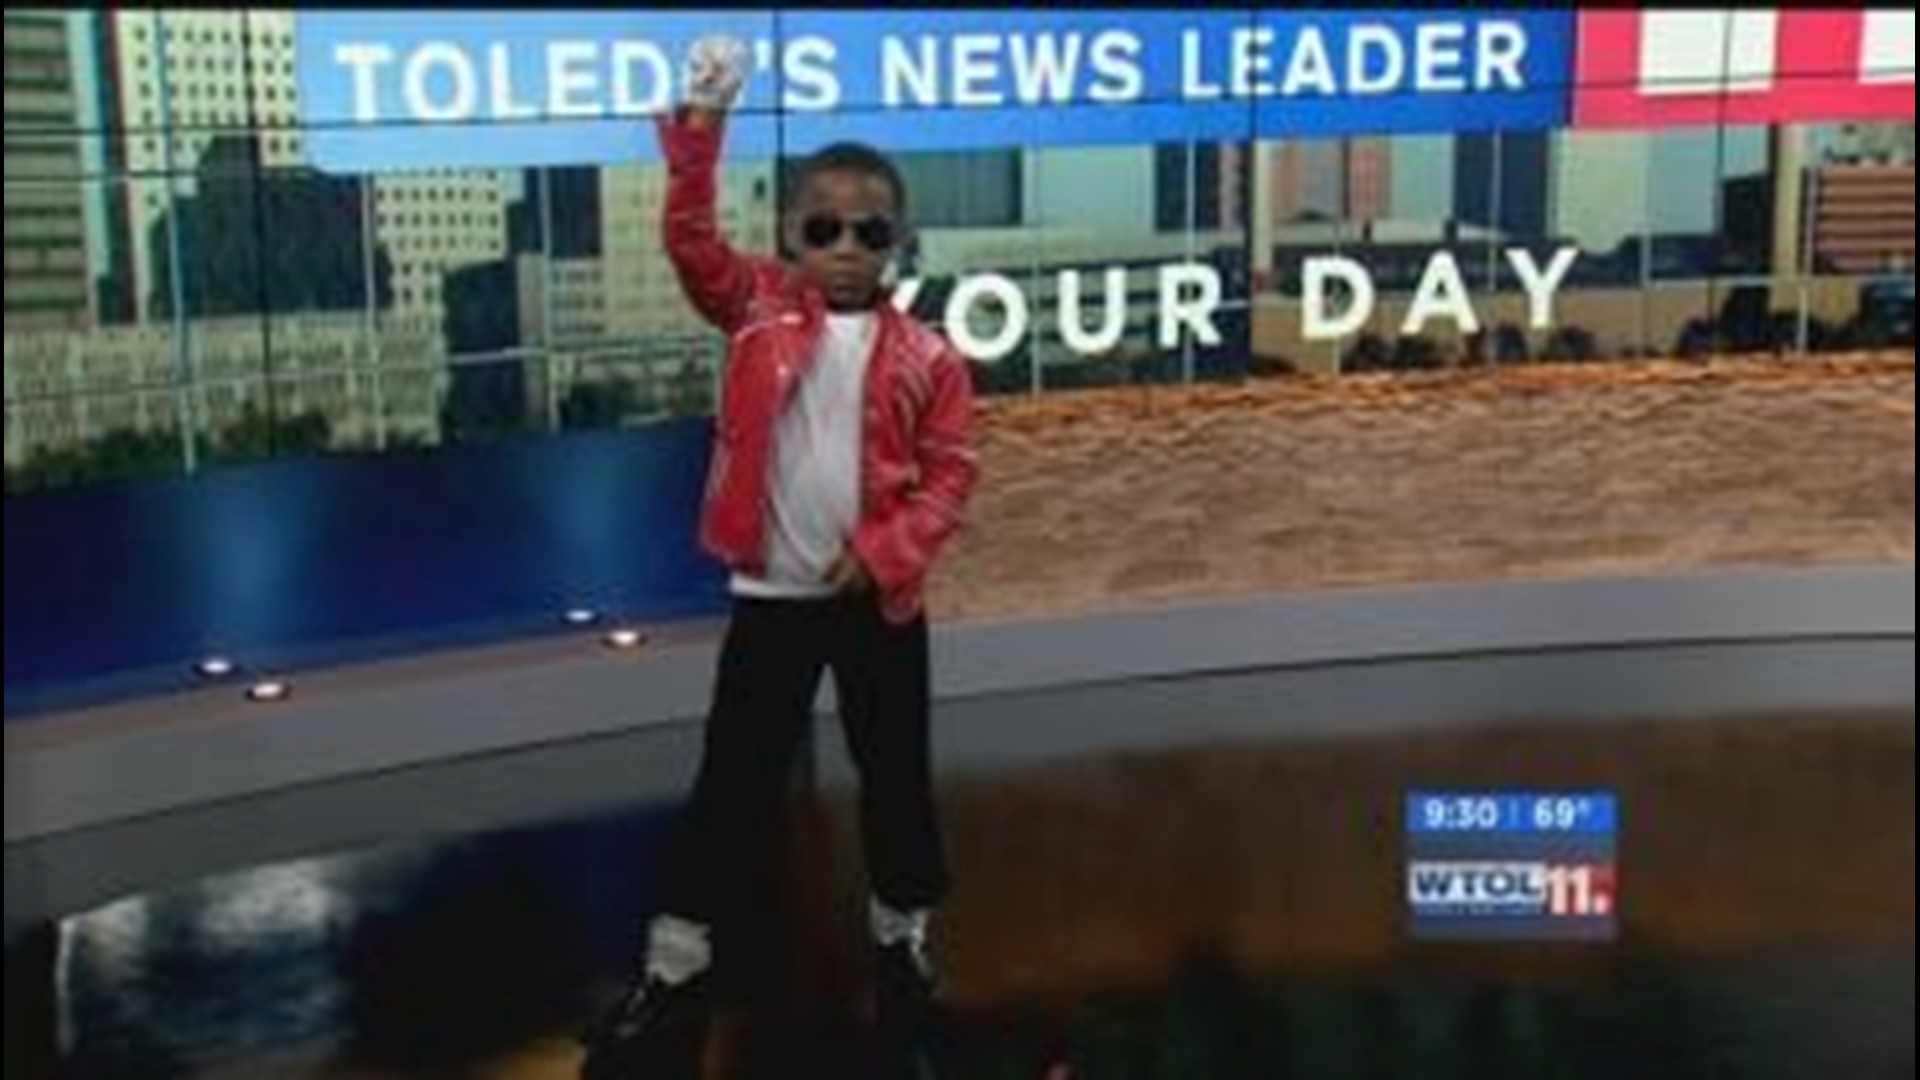 'Kid of Pop' shows off his moves on WTOL 11 Your Day